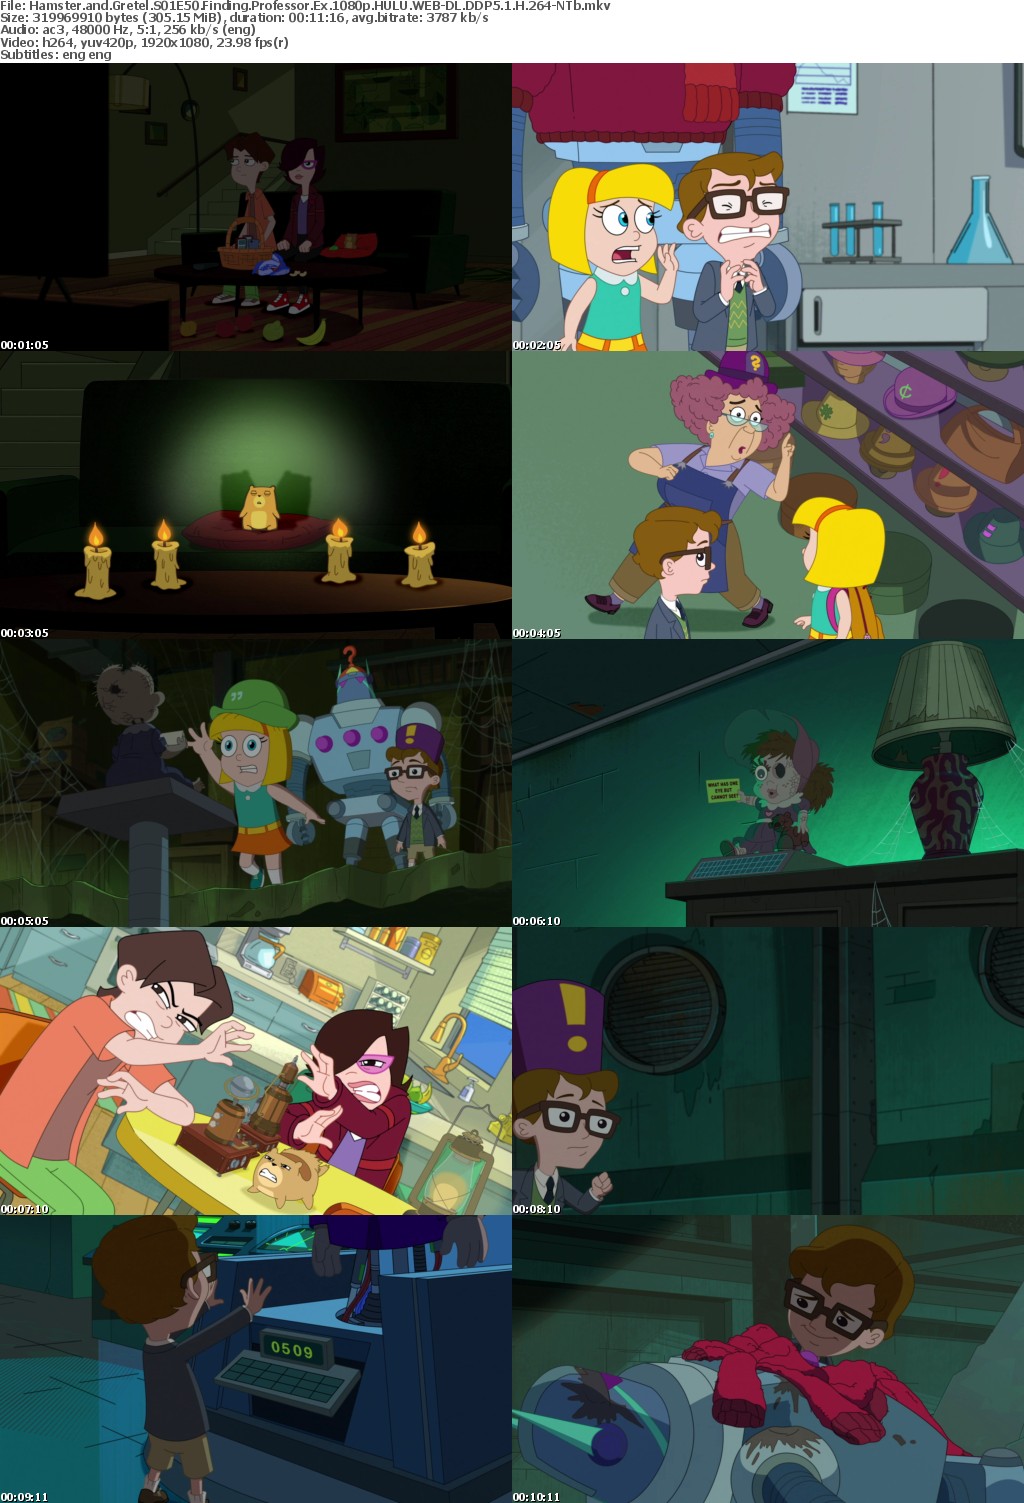 Hamster and Gretel S01E50 Finding Professor Ex 1080p HULU WEB-DL DDP5 1 H 264-NTb